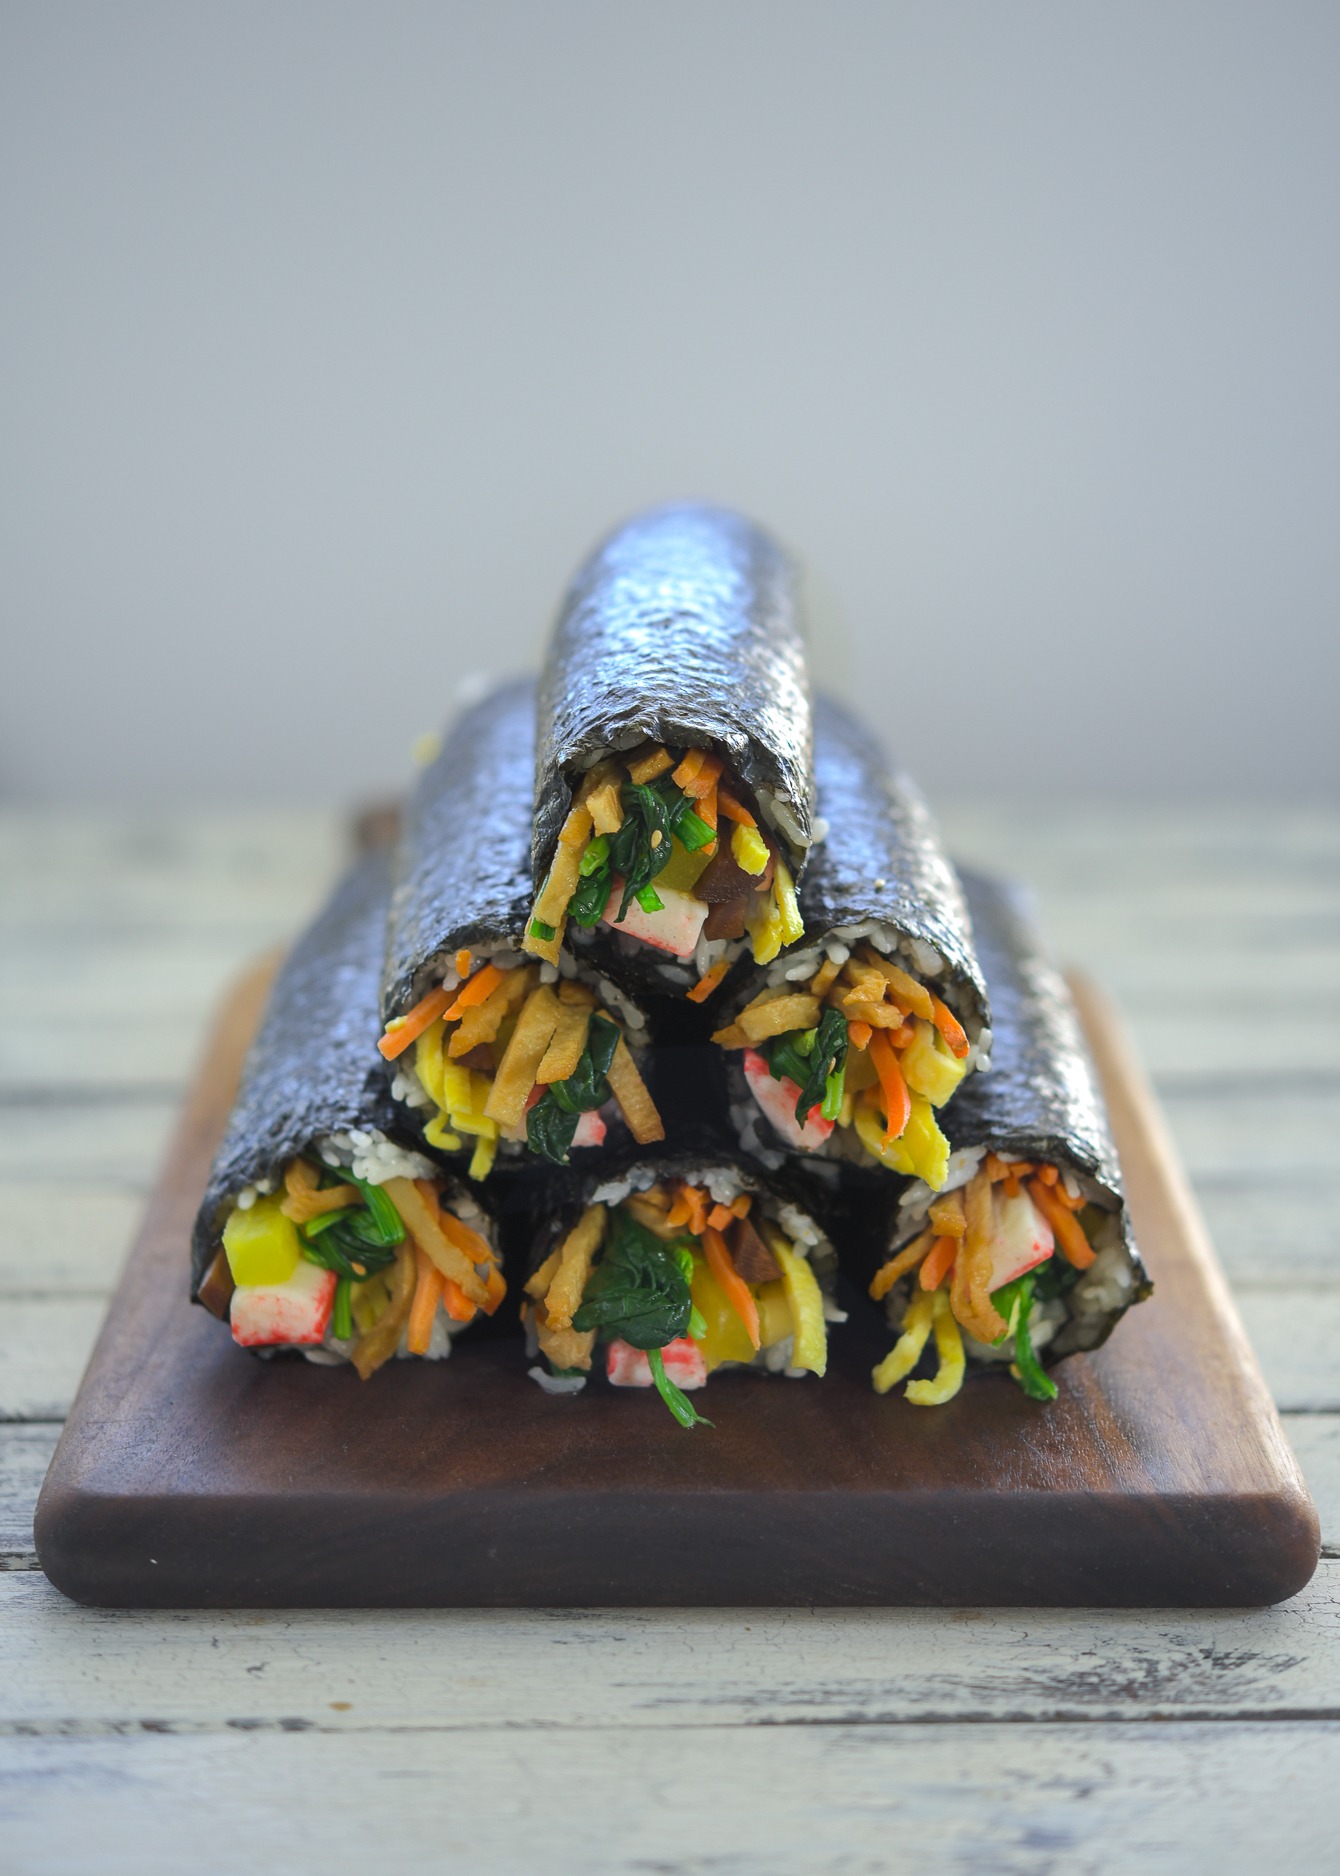 Kimbap (Korean seaweed rice rolls) or gimbap stacked together on a wooden board.